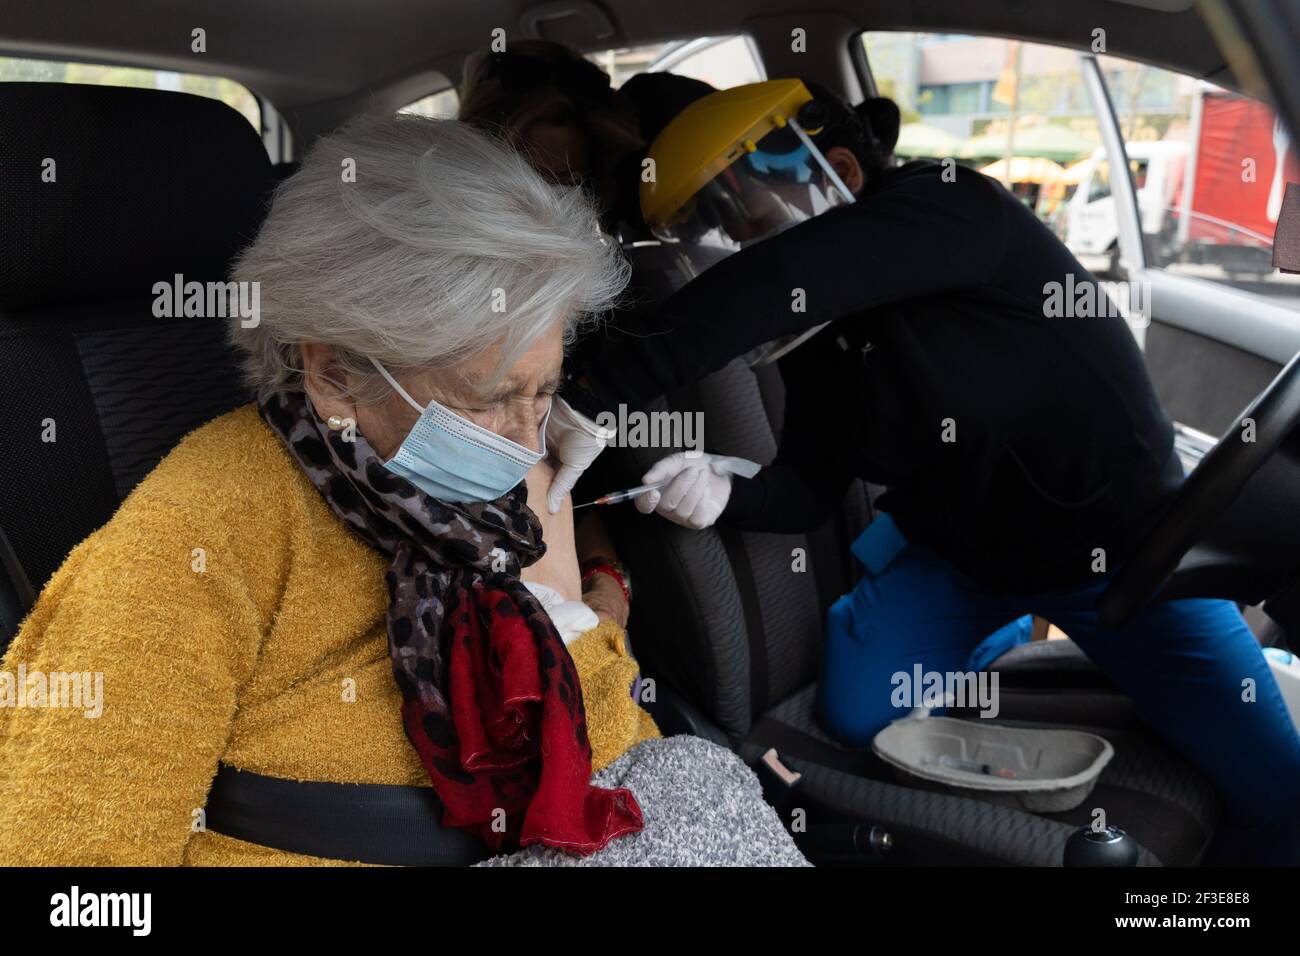 March 16, 2021, Santiago, Metropolitana, Chile: A woman is vaccinated with her second dose of the Sinovac COVID-19 vaccine at a drive-thru vaccination site in Santiago, Chile. So far, almost 5 million people have been vaccinated in the country, and 41% of them with the second dose. (Credit Image: © Matias Basualdo/ZUMA Wire) Stock Photo